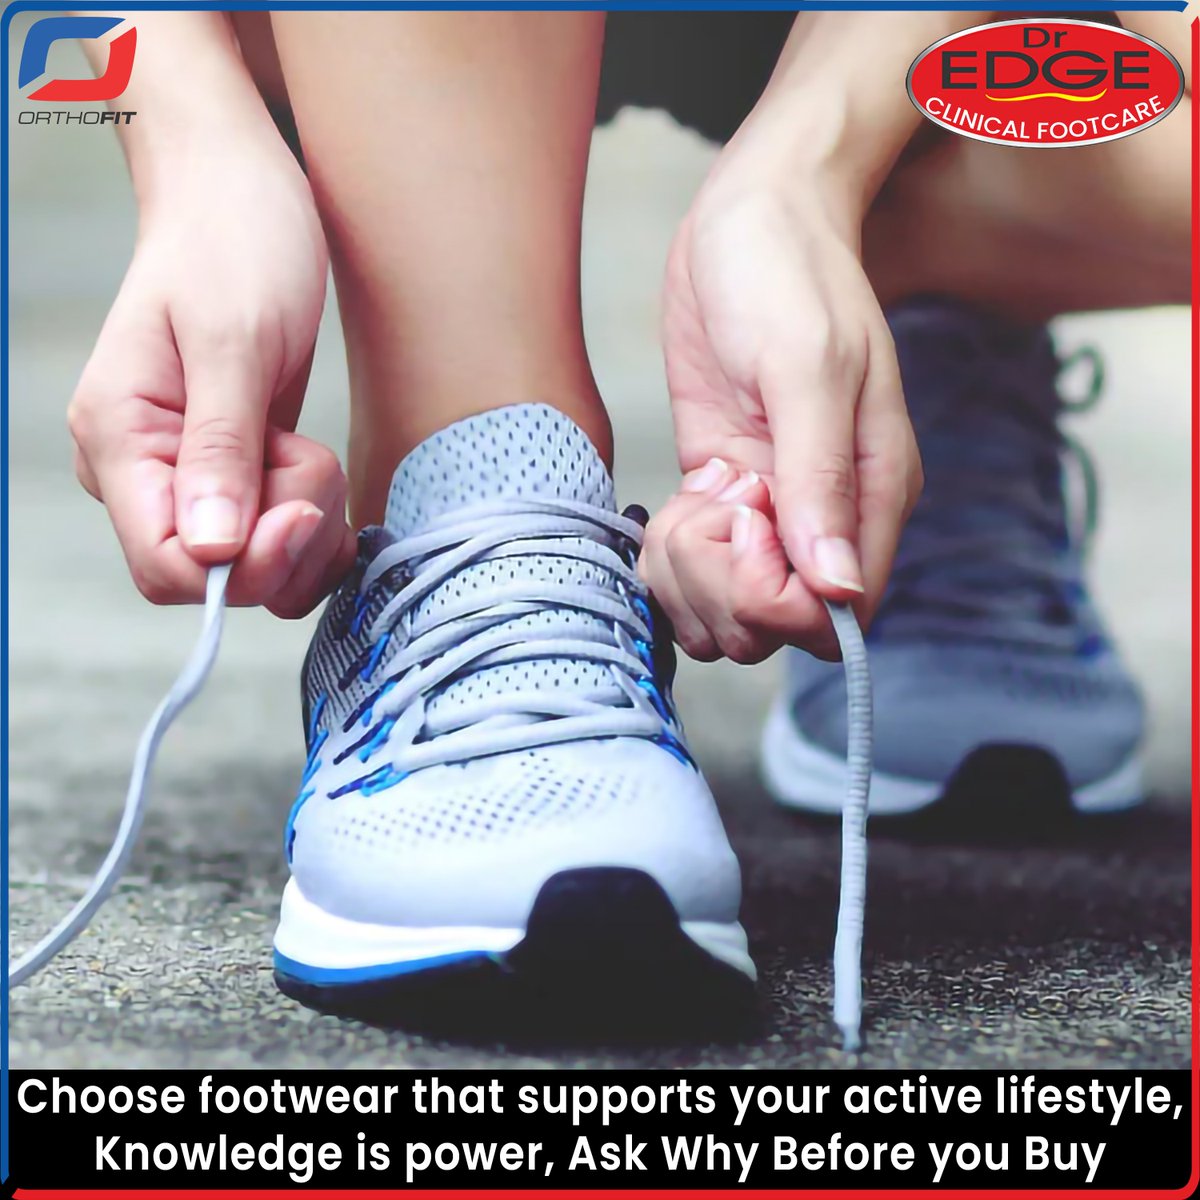 Choose footwear that supports your active lifestyle

Knowledge is Power

Ask why before you buy

#orthofit #orthofitclinic #orthofitmart #knowledgeispower #askwhybeforeyoubuy #edgefootwear #edge #orthoticfootwear #podiatry #podiatrist #podiatristnearme #footclinic